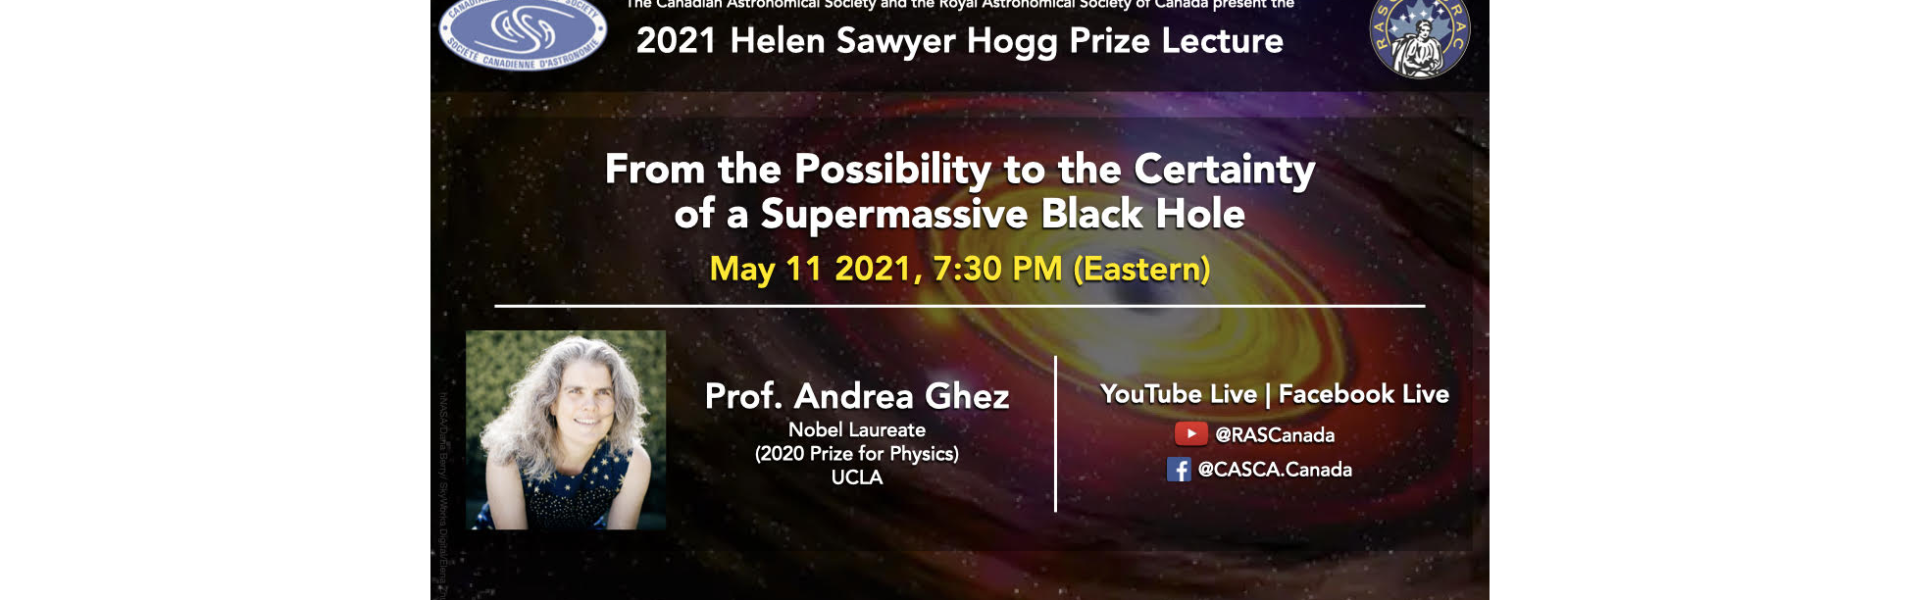 2021 Helen Sawyer Hogg Prize Lecture